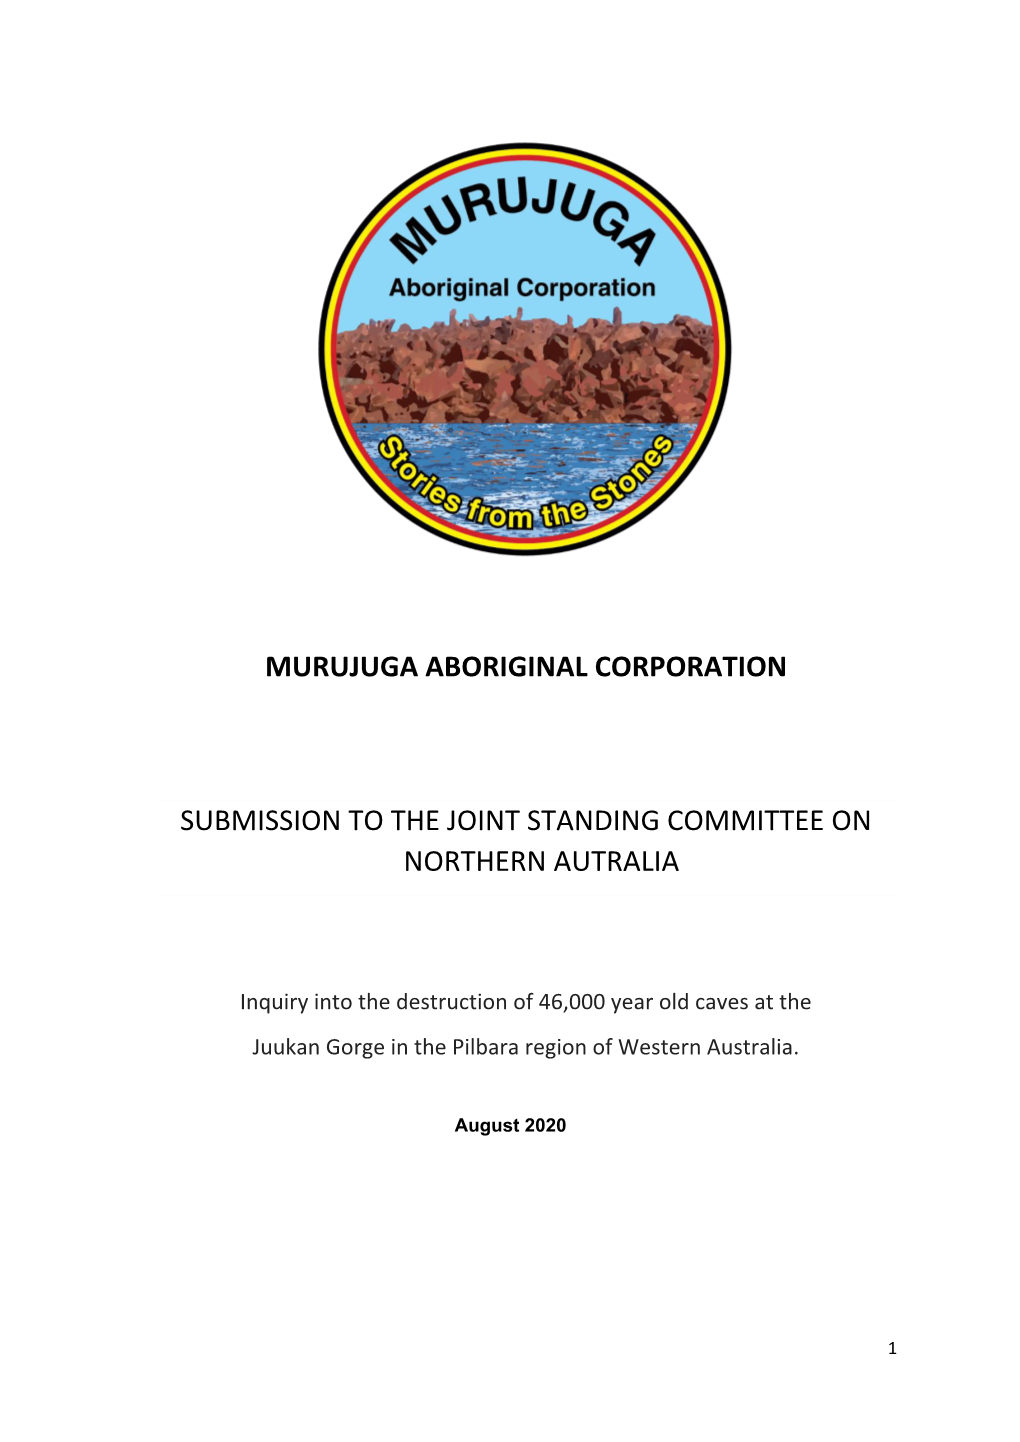 Murujuga Aboriginal Corporation Submission to the Joint Standing